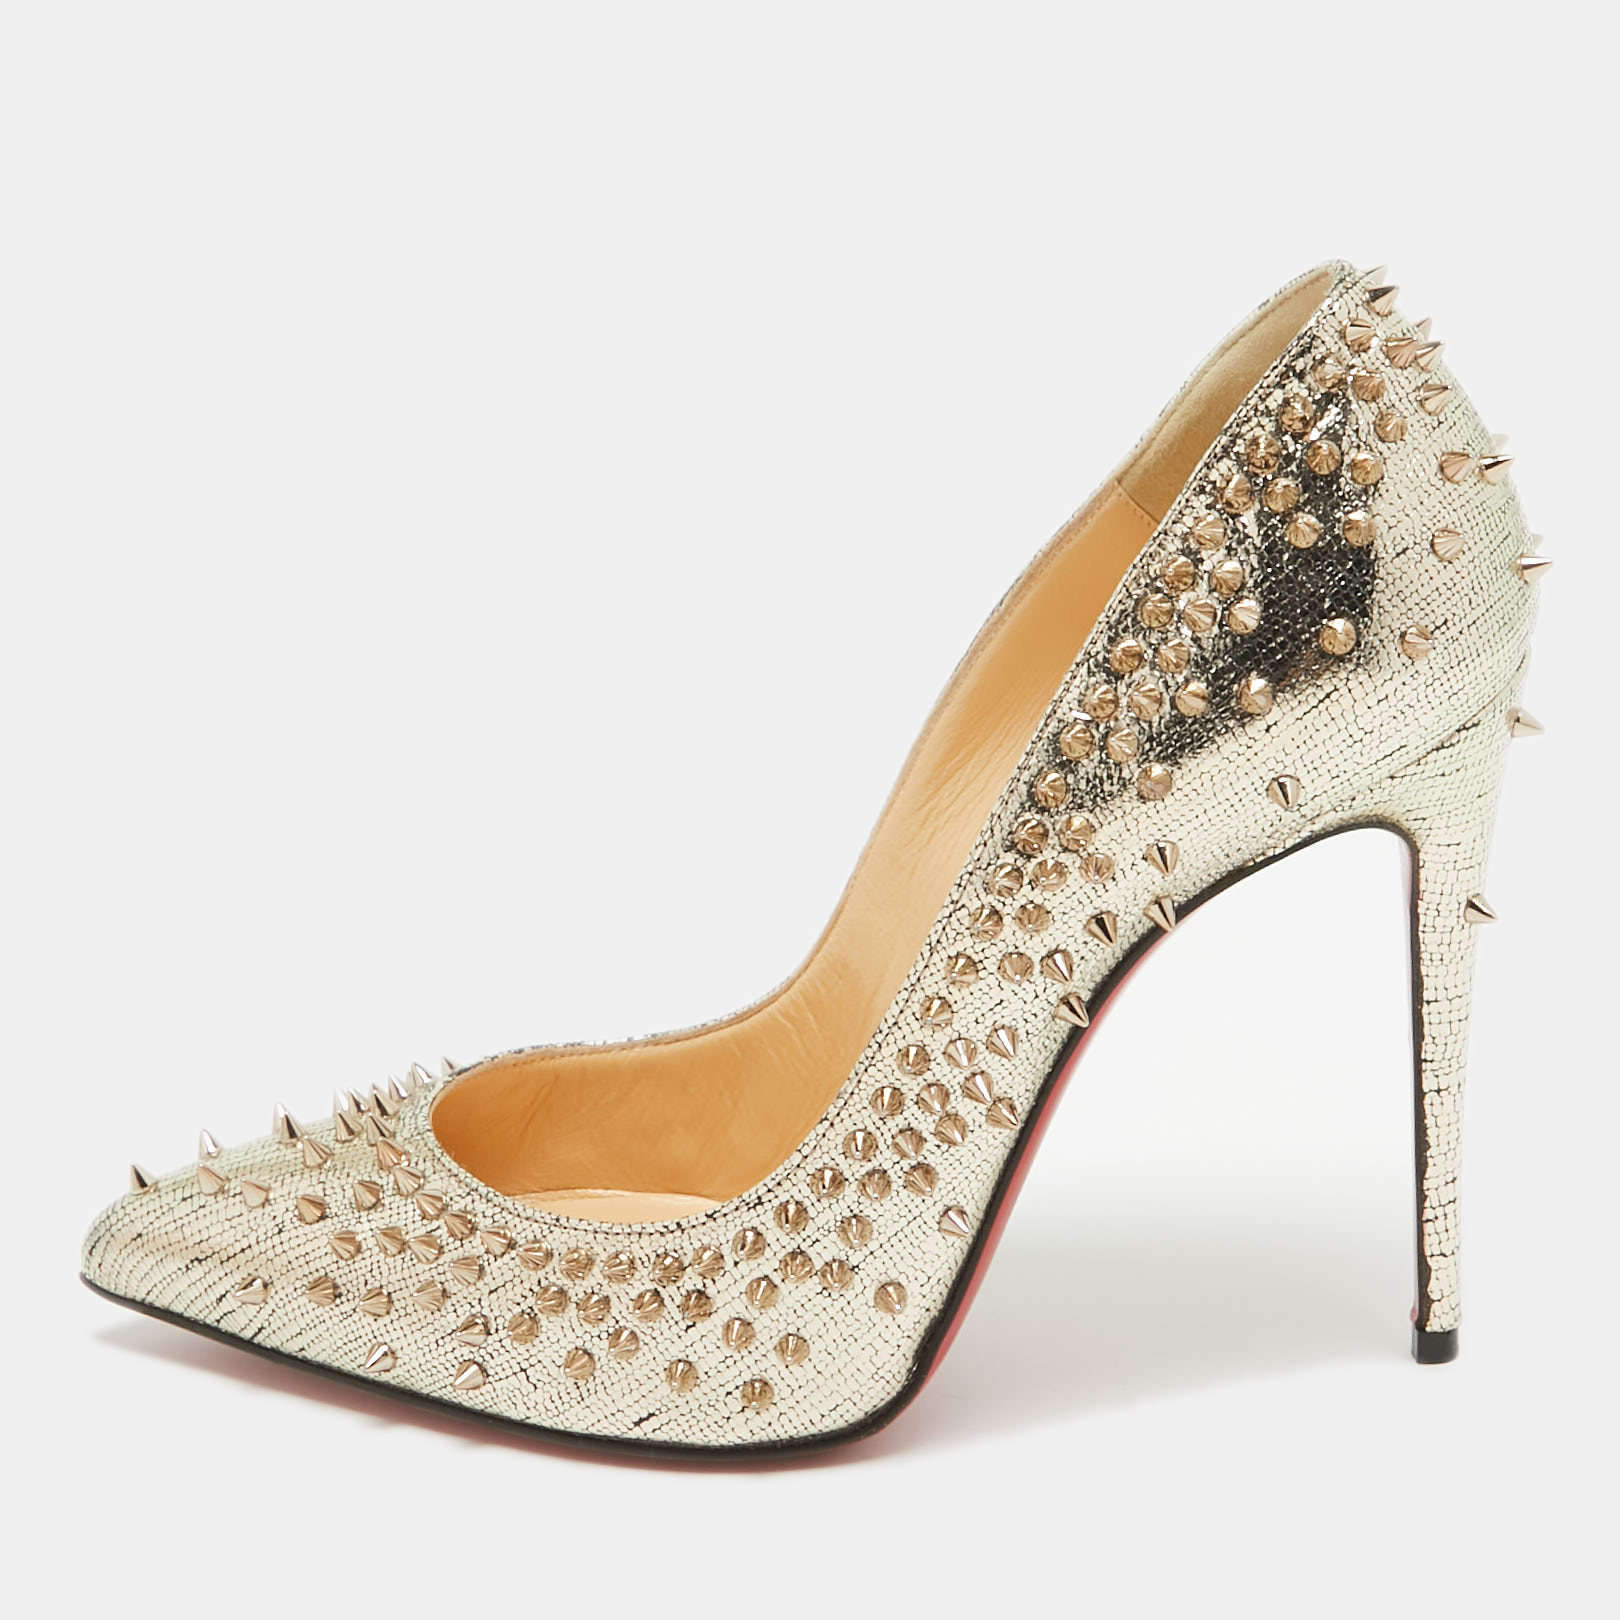 Pre-owned Christian Louboutin Gold Laminated Suede Escarpic Spike Pumps Size 37.5